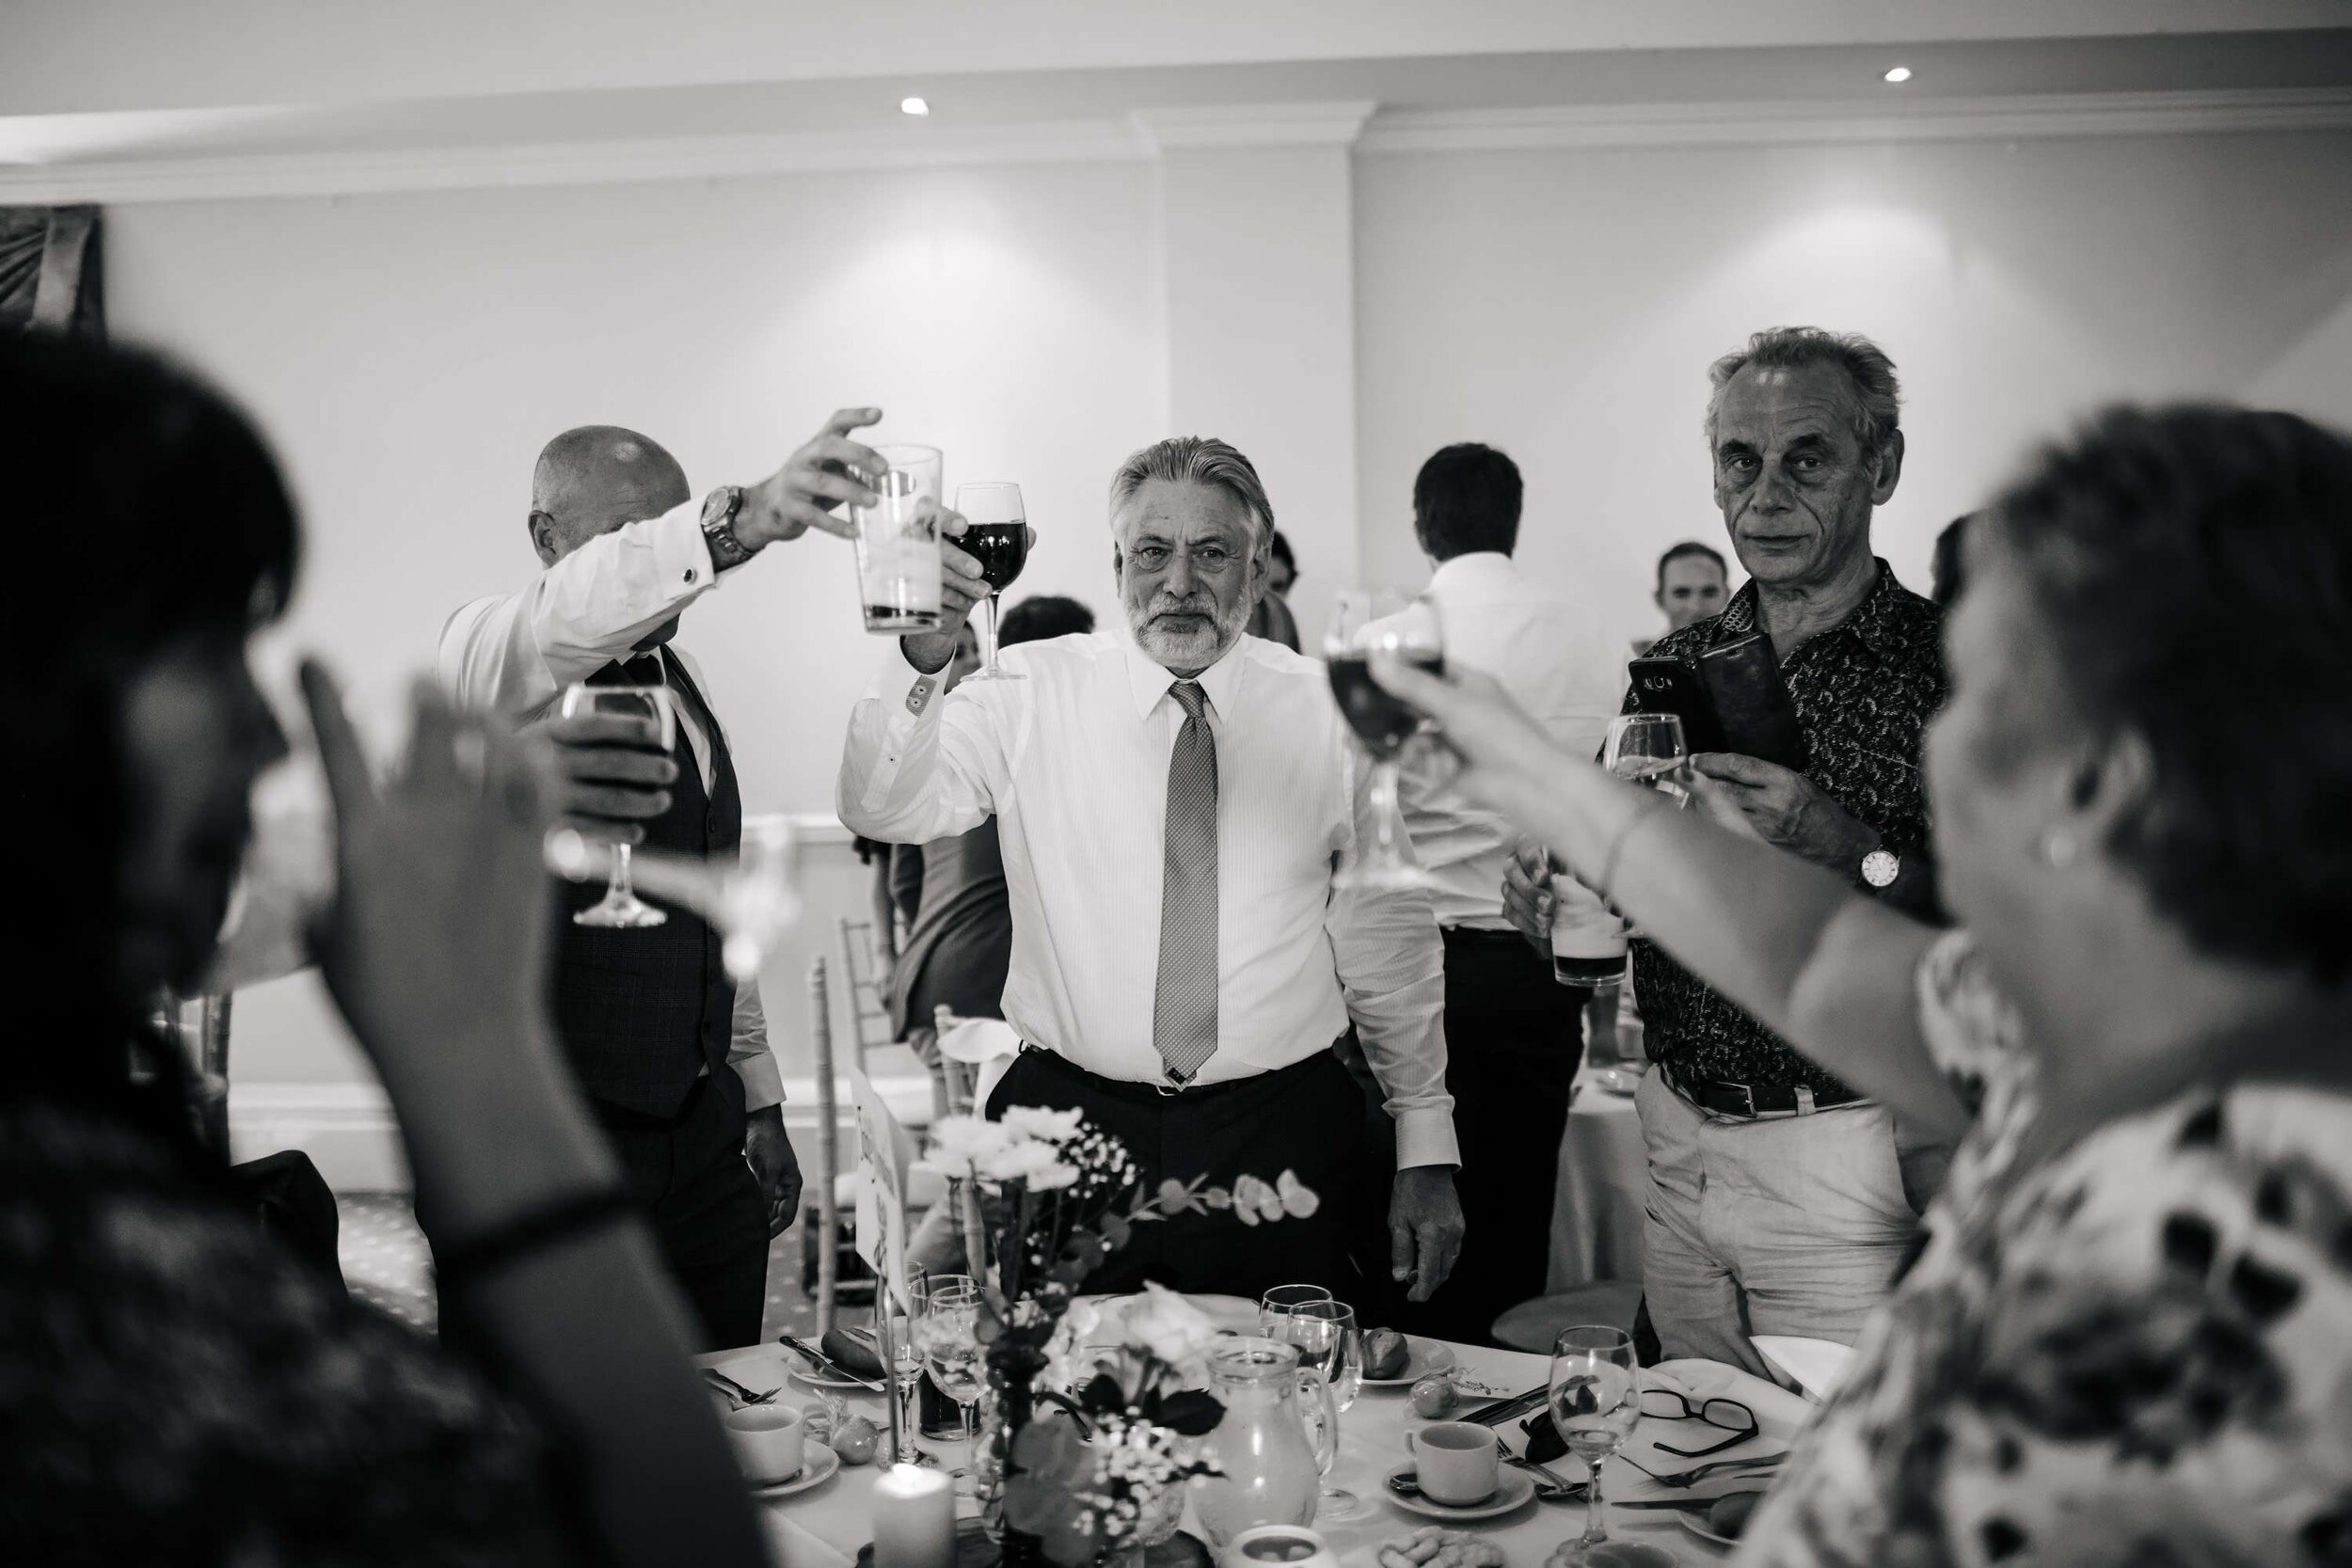 Guests toasting drinks at a Solberge Hall wedding